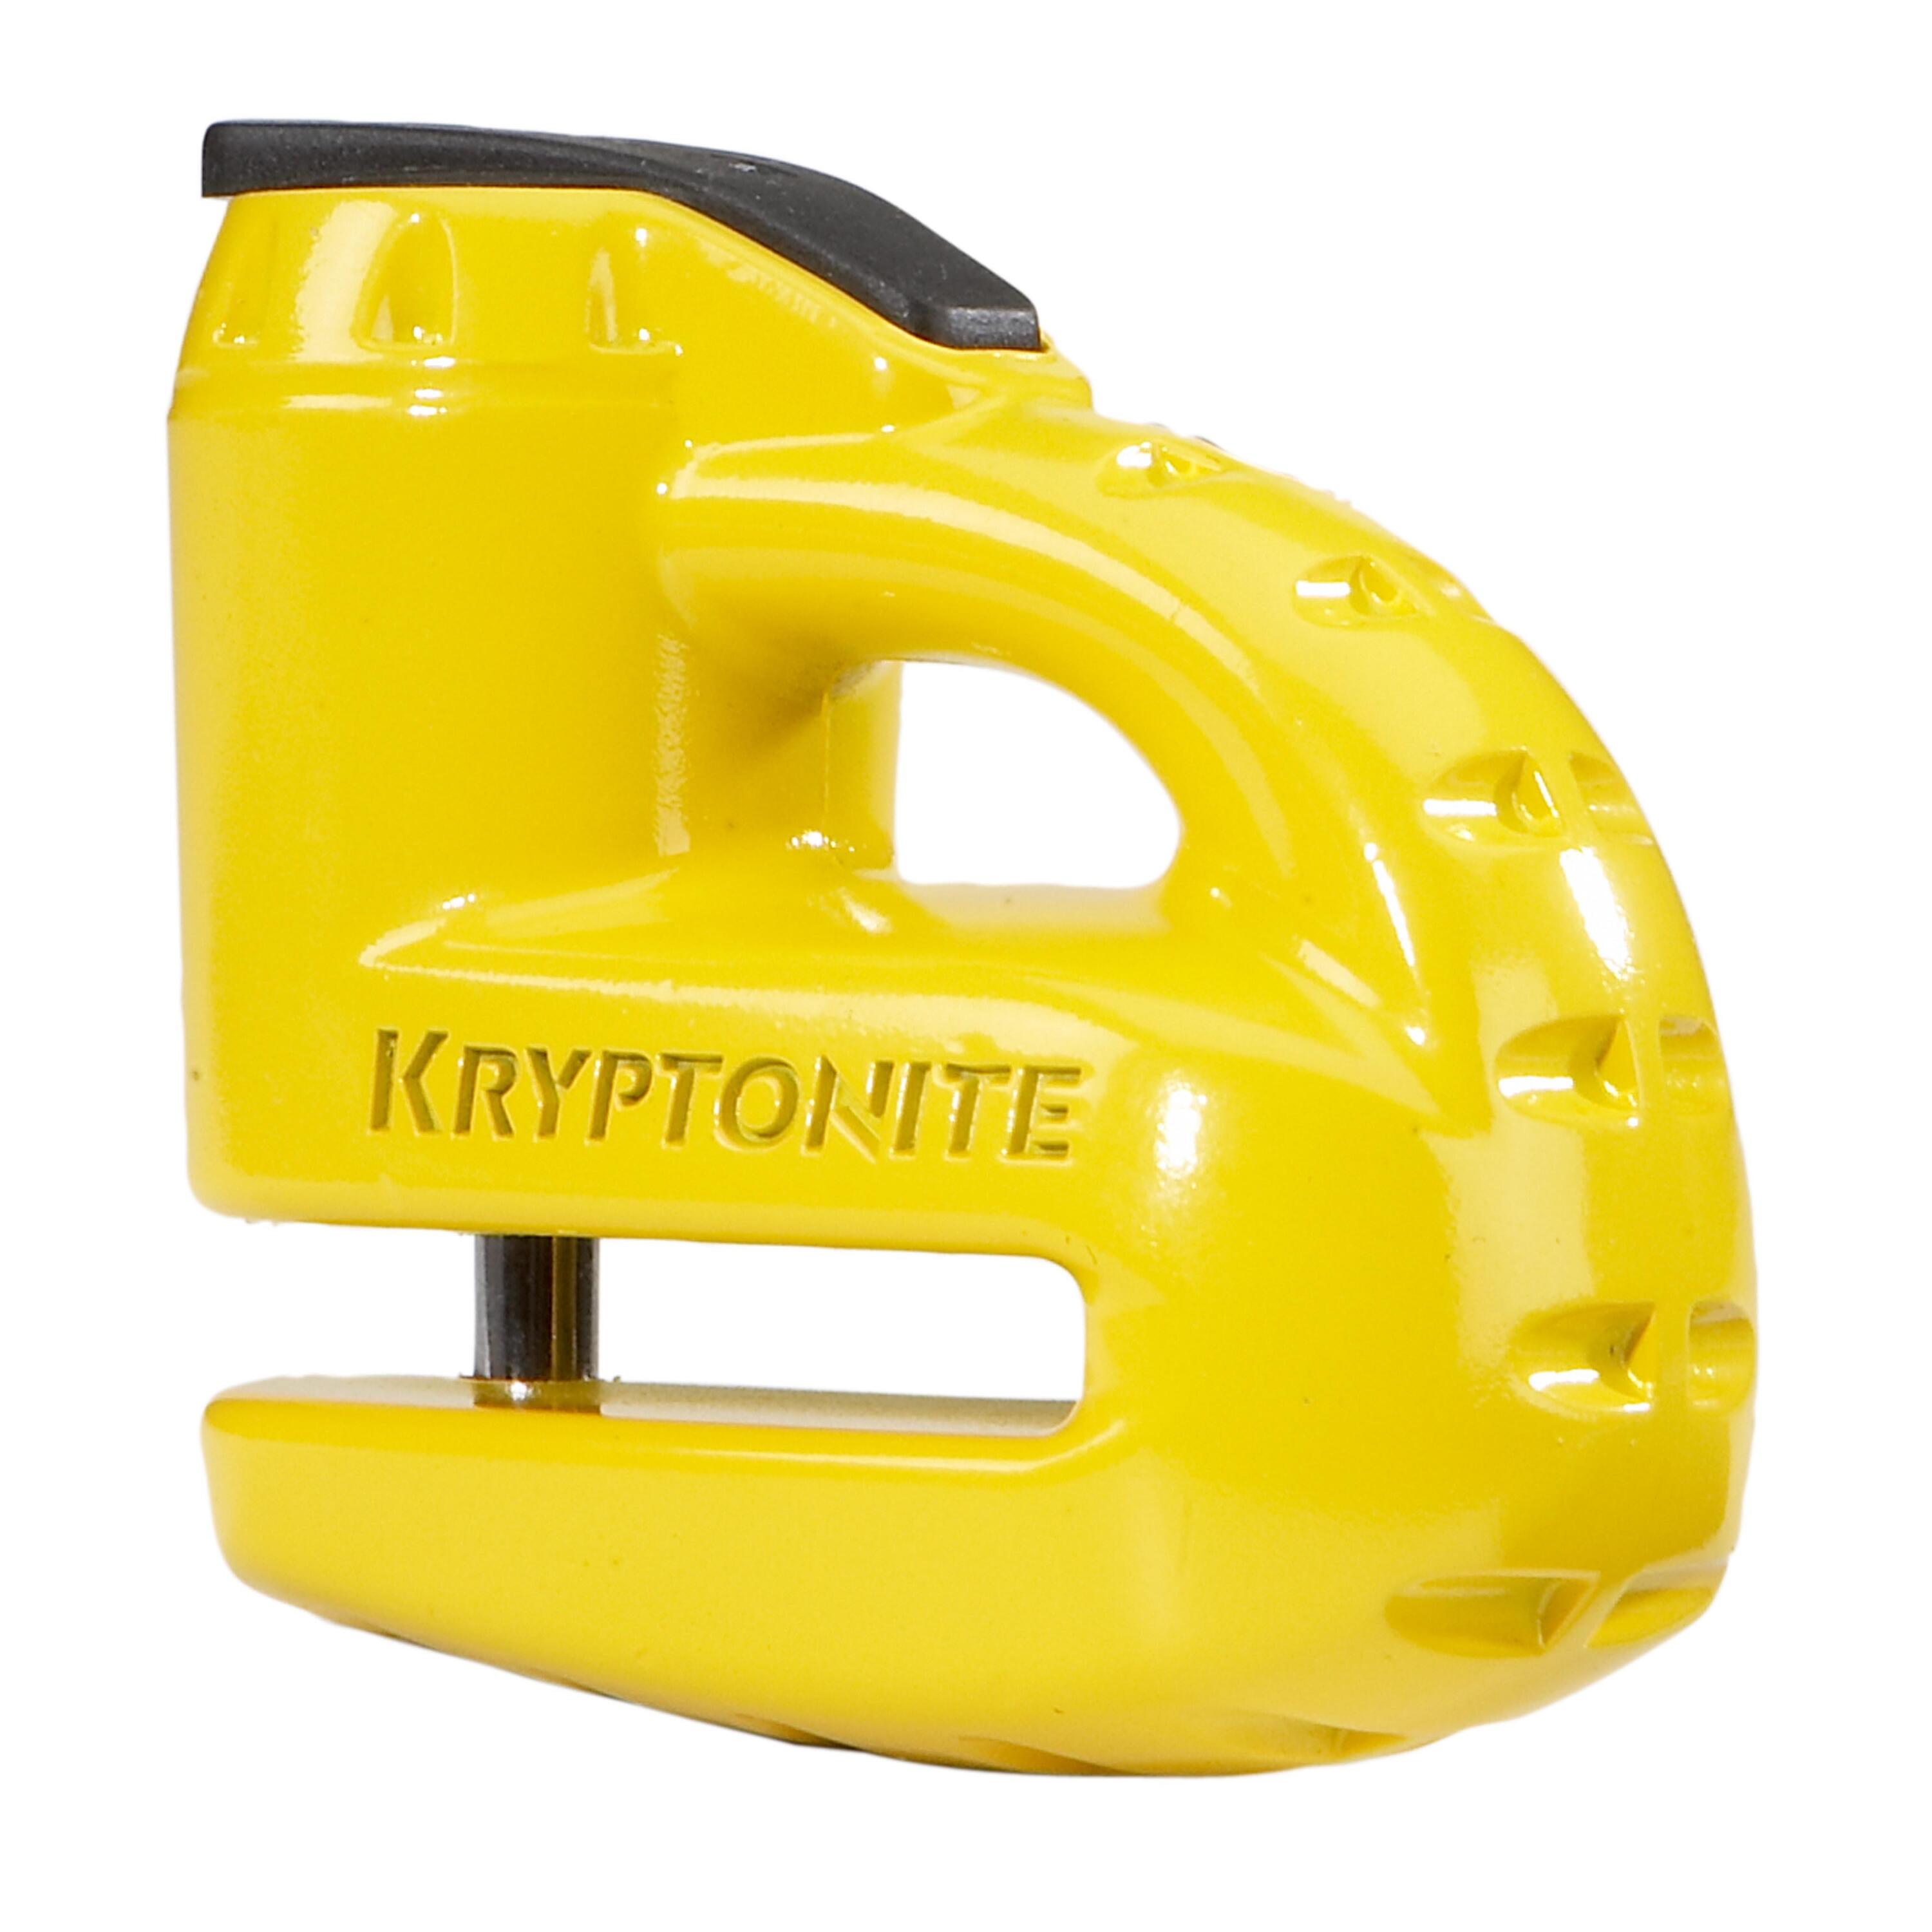 Kryptonite Keeper 5-S Disc Lock - with Reminder Cable 2/5